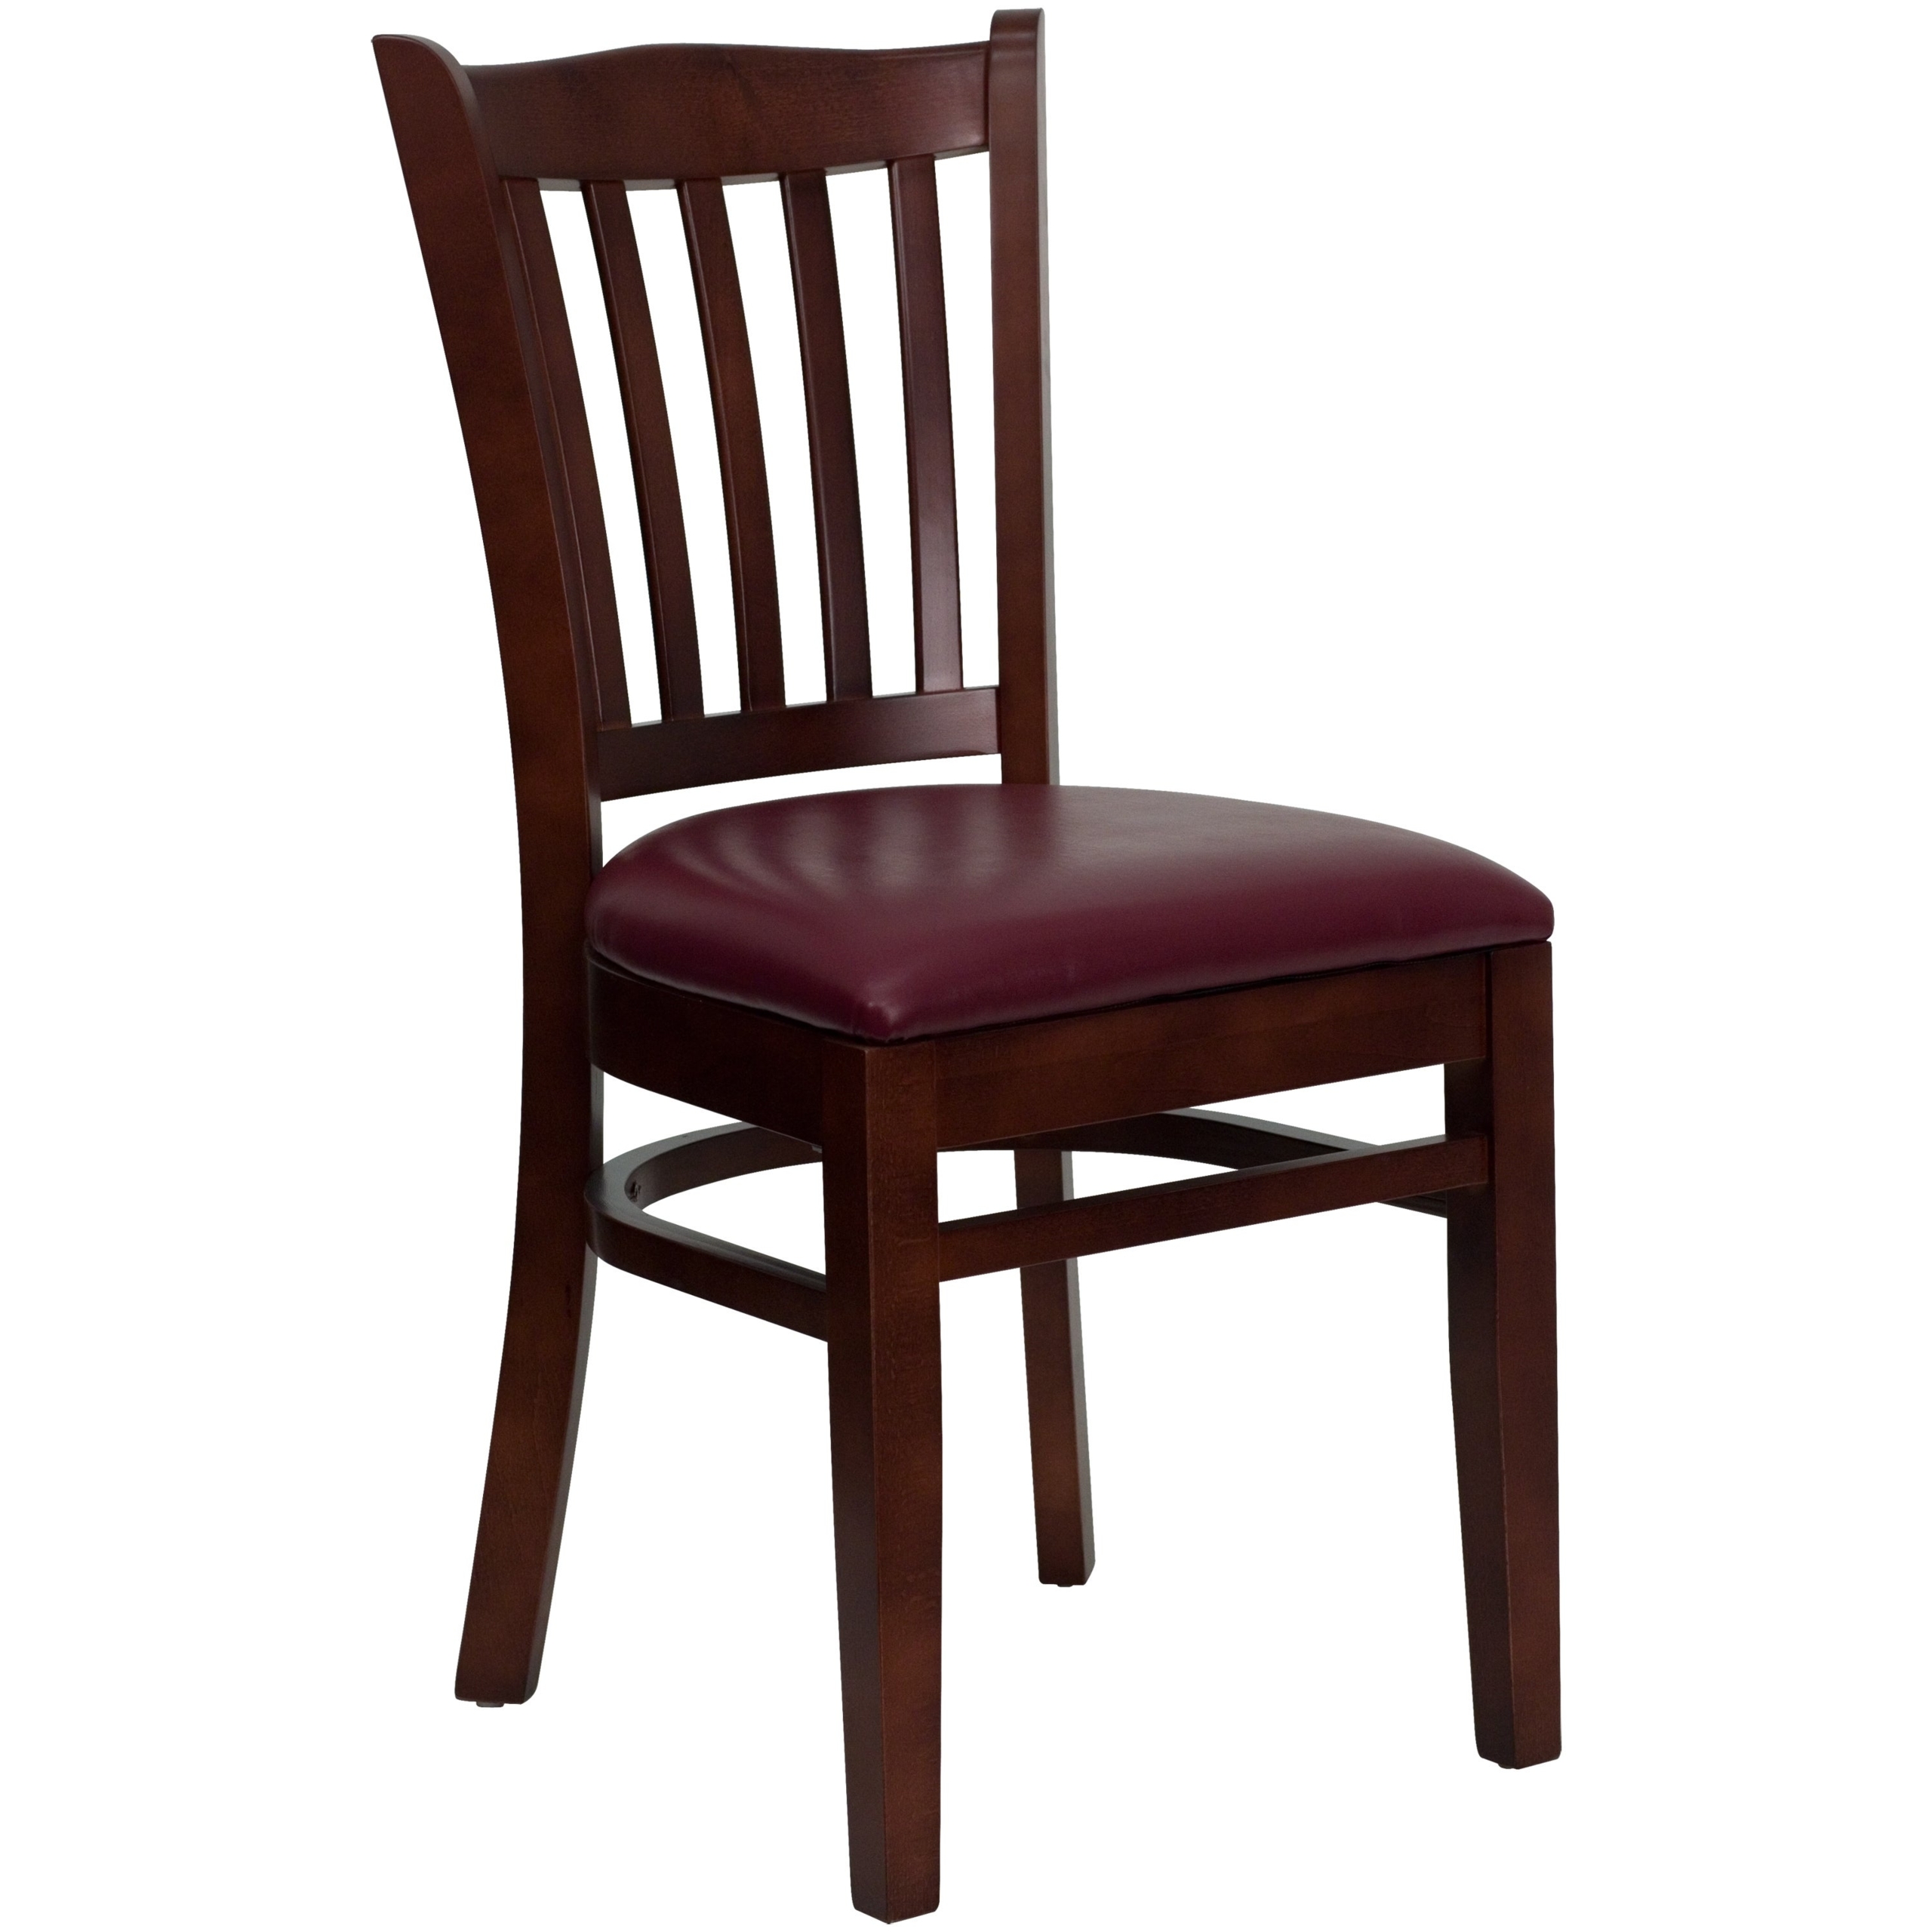 Heavy duty dining chairs 2